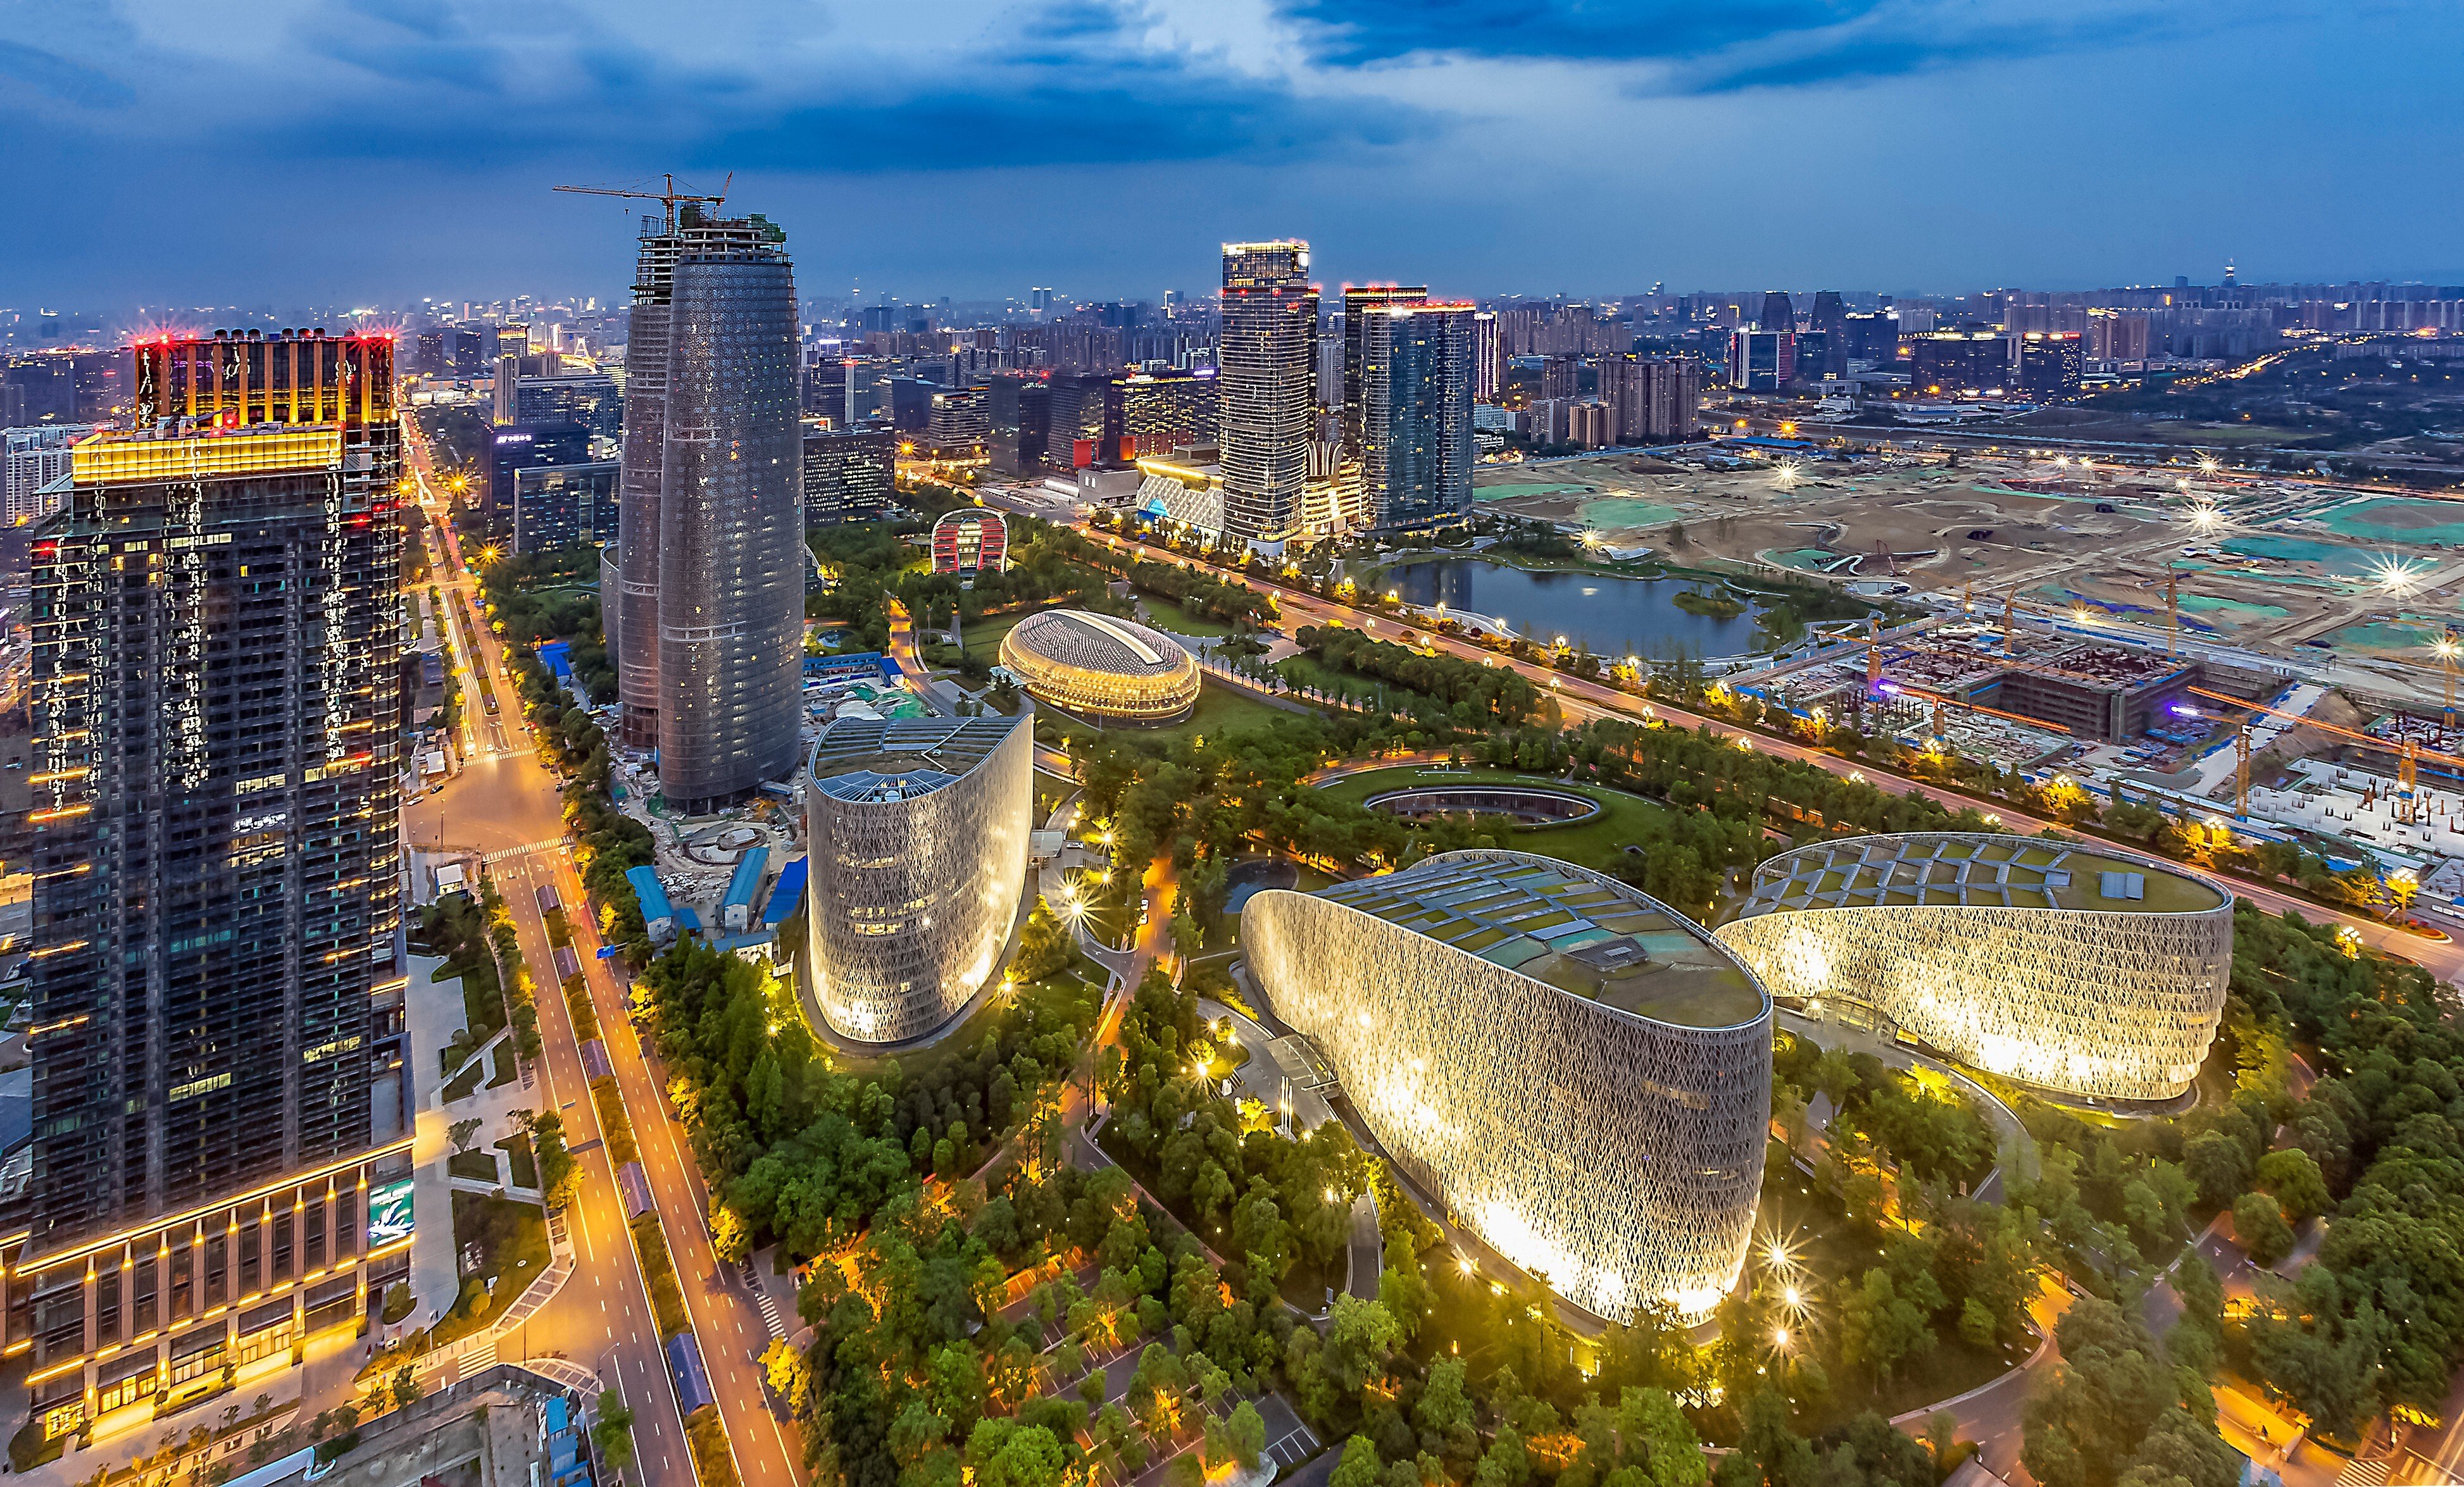 Chengdu, capital of China’s southwest province of Sichuan, has a reputation as a hi-tech hub of innovation, and is home to the subsidiaries of multinational conglomerates, such as Samsung, IBM, Tencent and Alibaba. Photo: Shutterstock